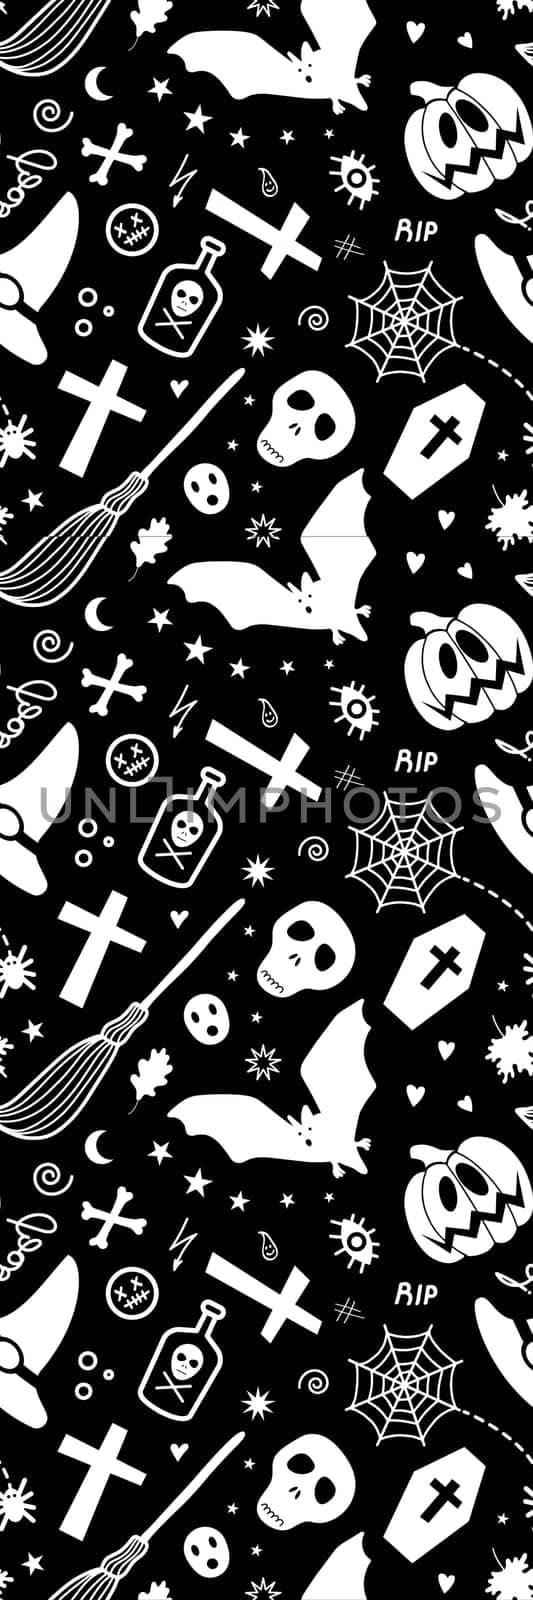 Black and White bookmark with funny creepy Halloween characters